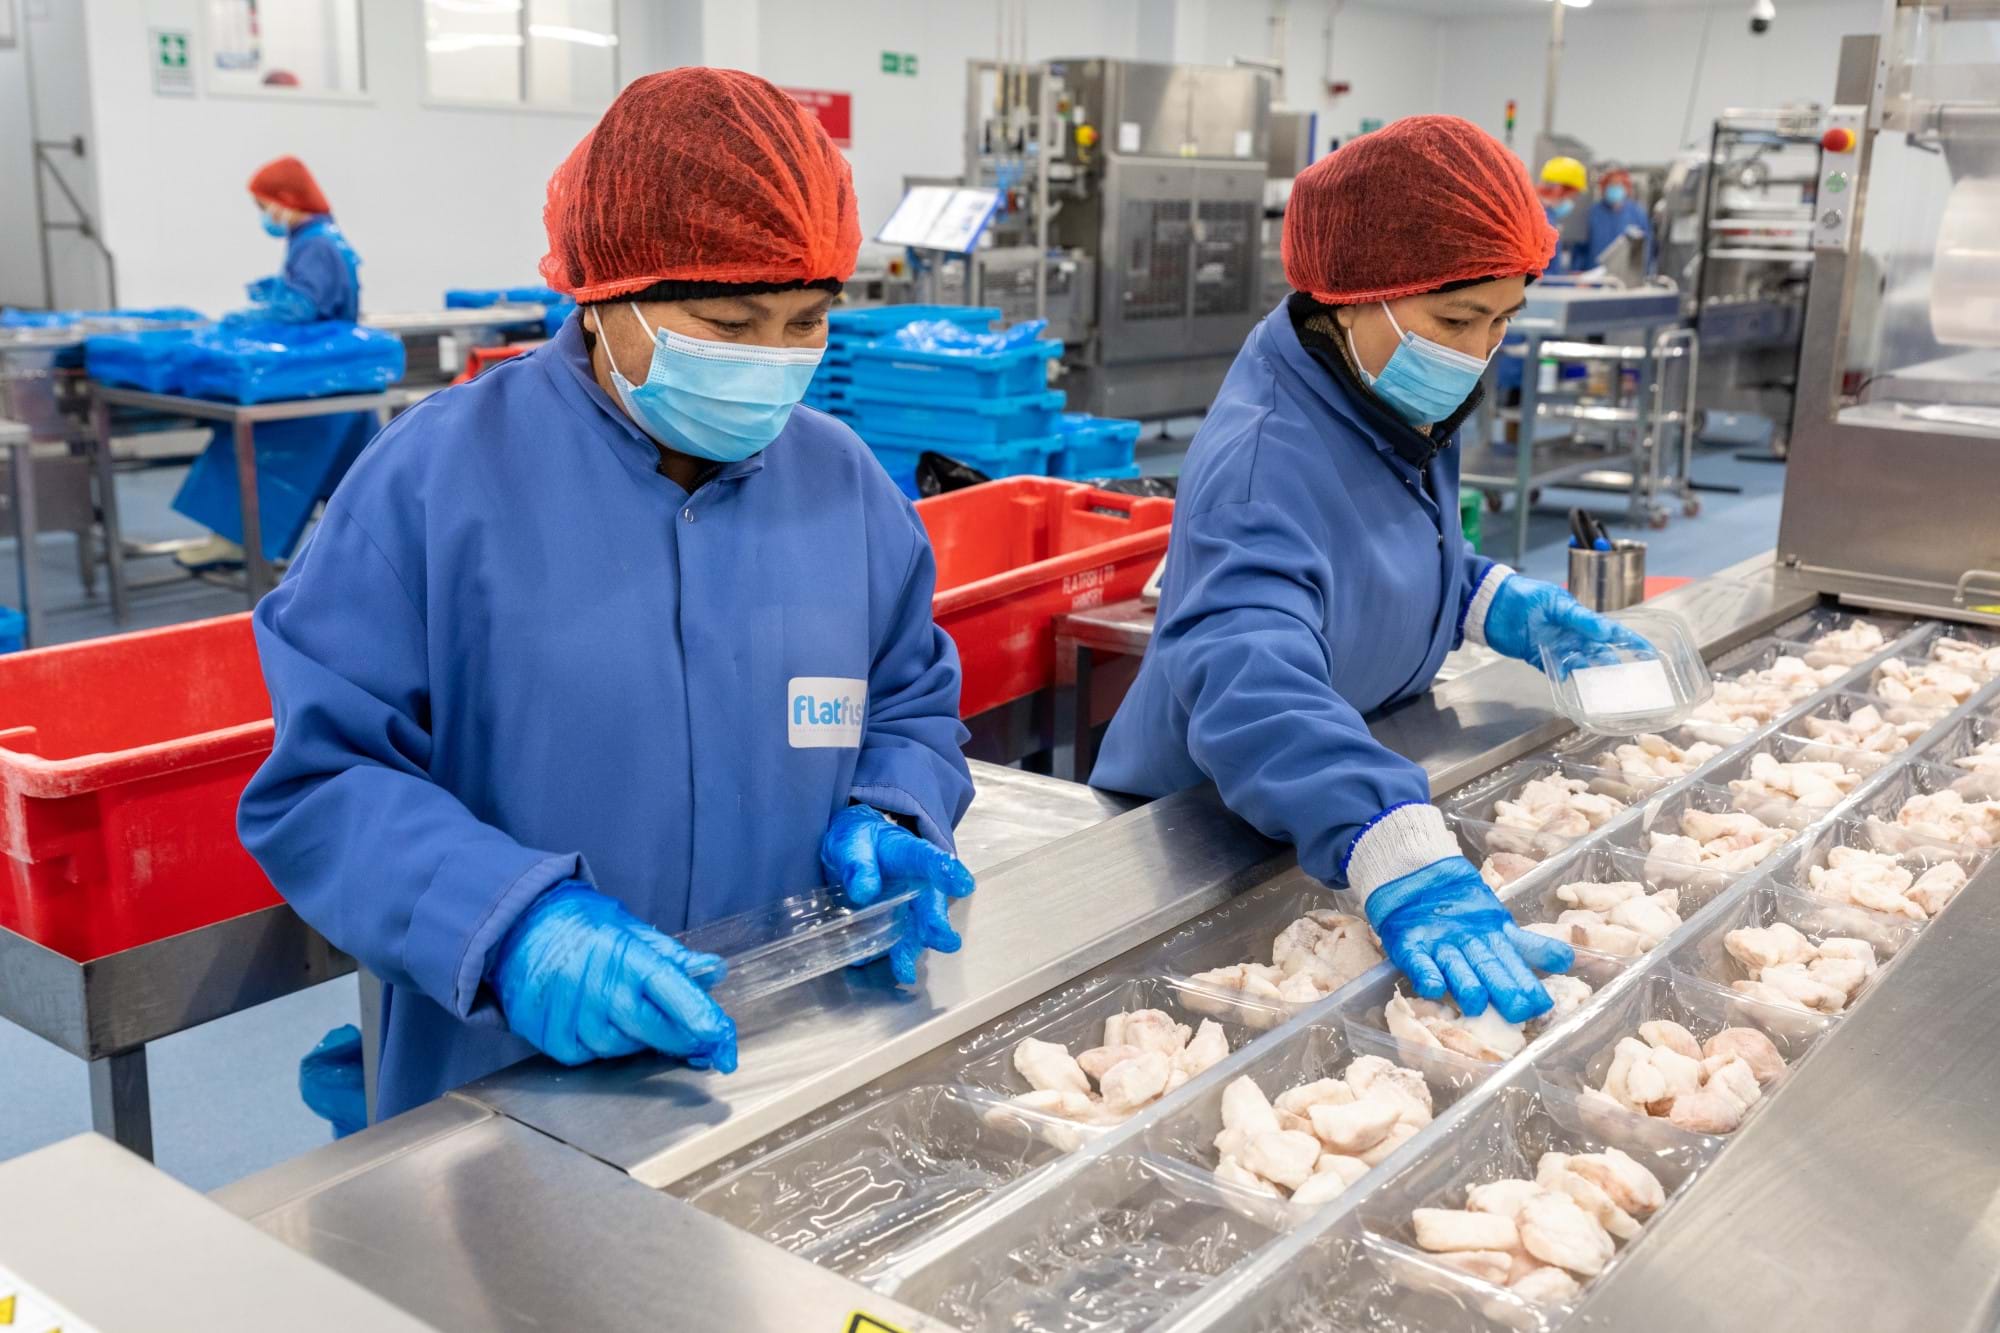 Workers packaging seafood in processing factory